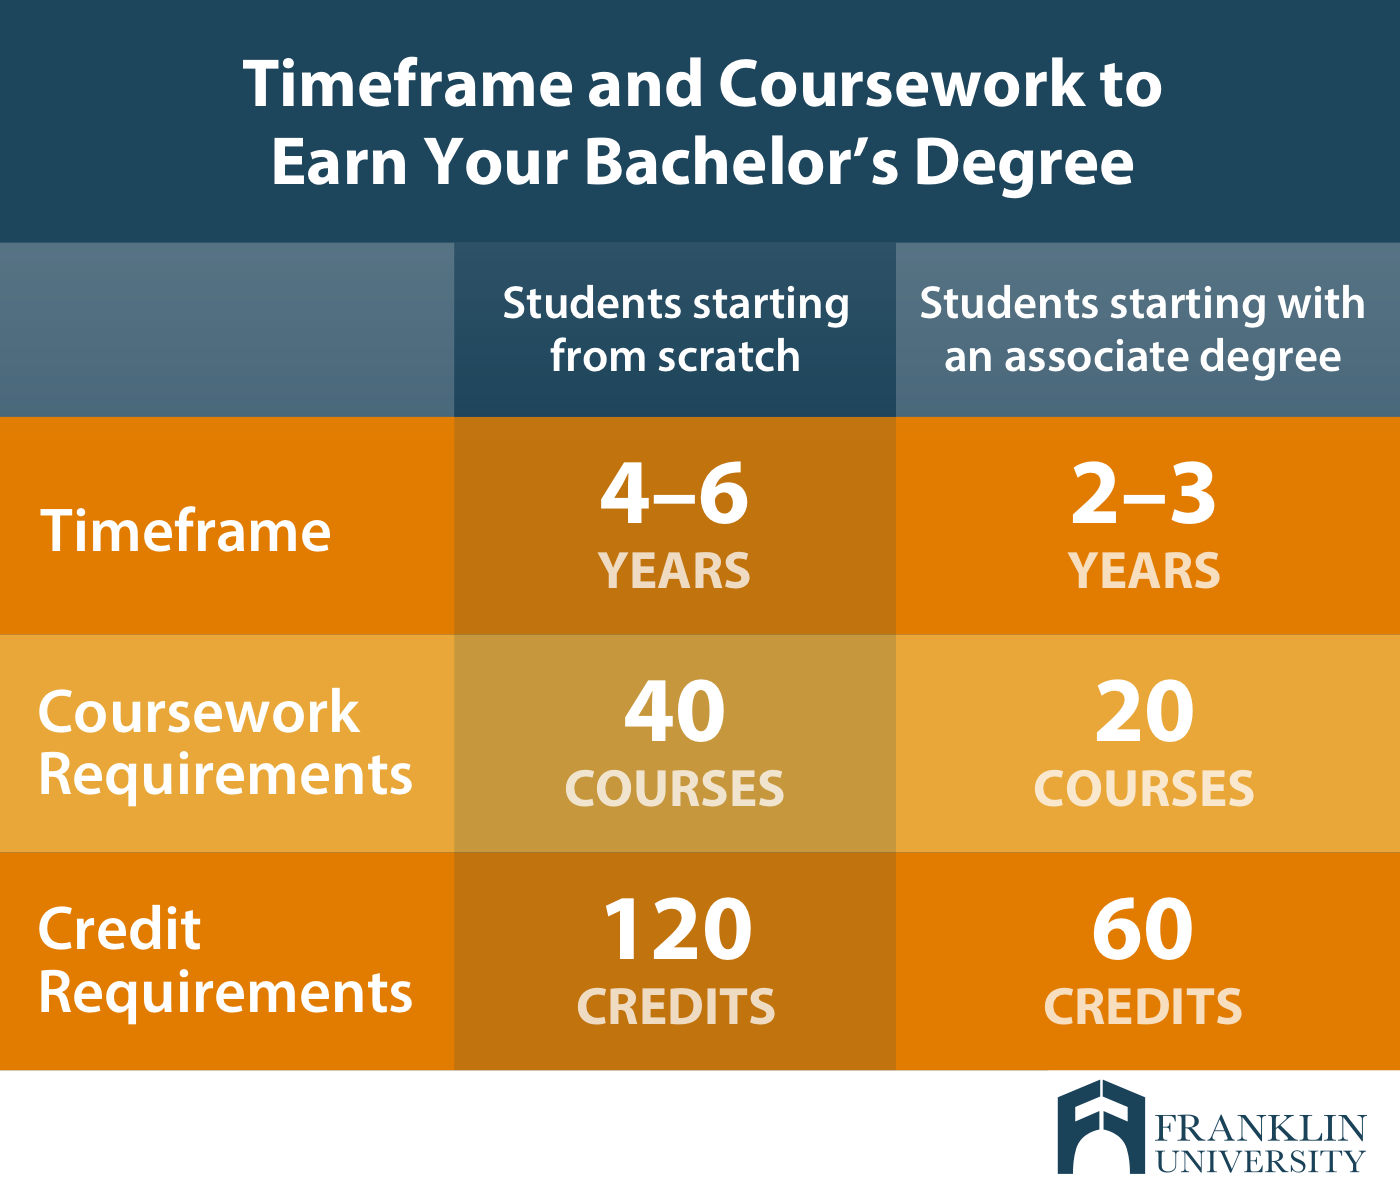 How Long Is It for a Bachelor Degree?